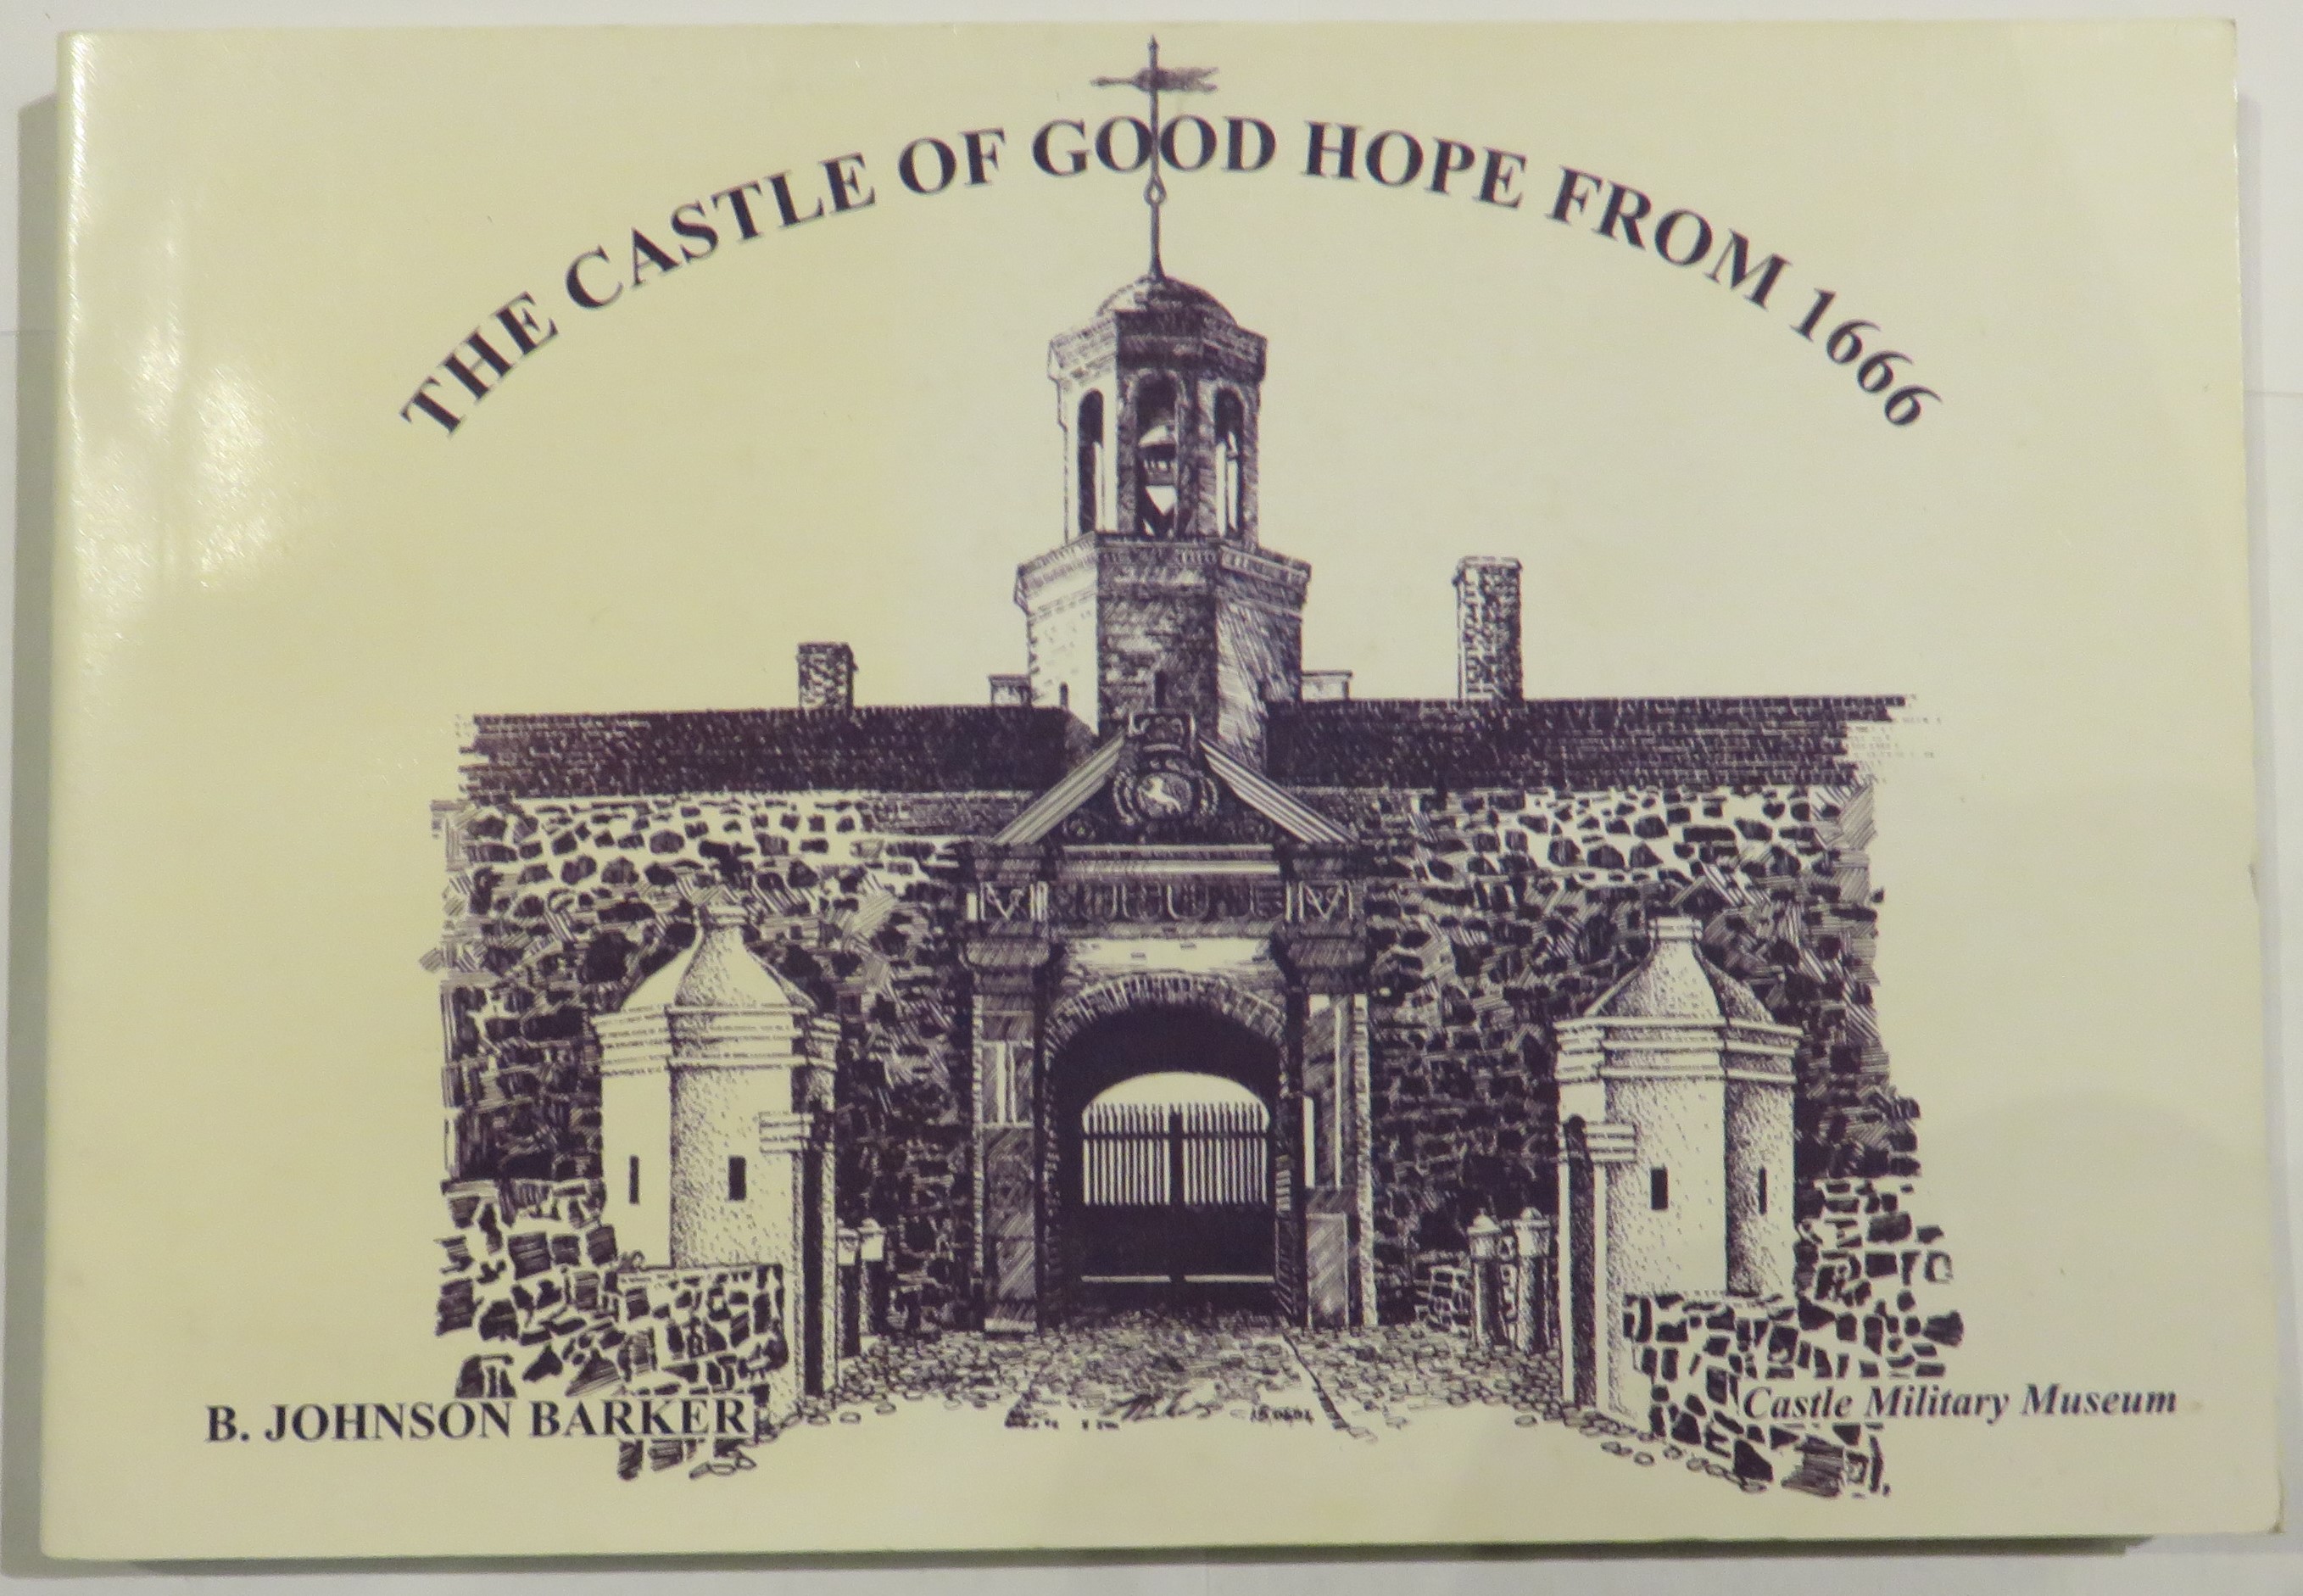 The Castle of Good Hope From 1666